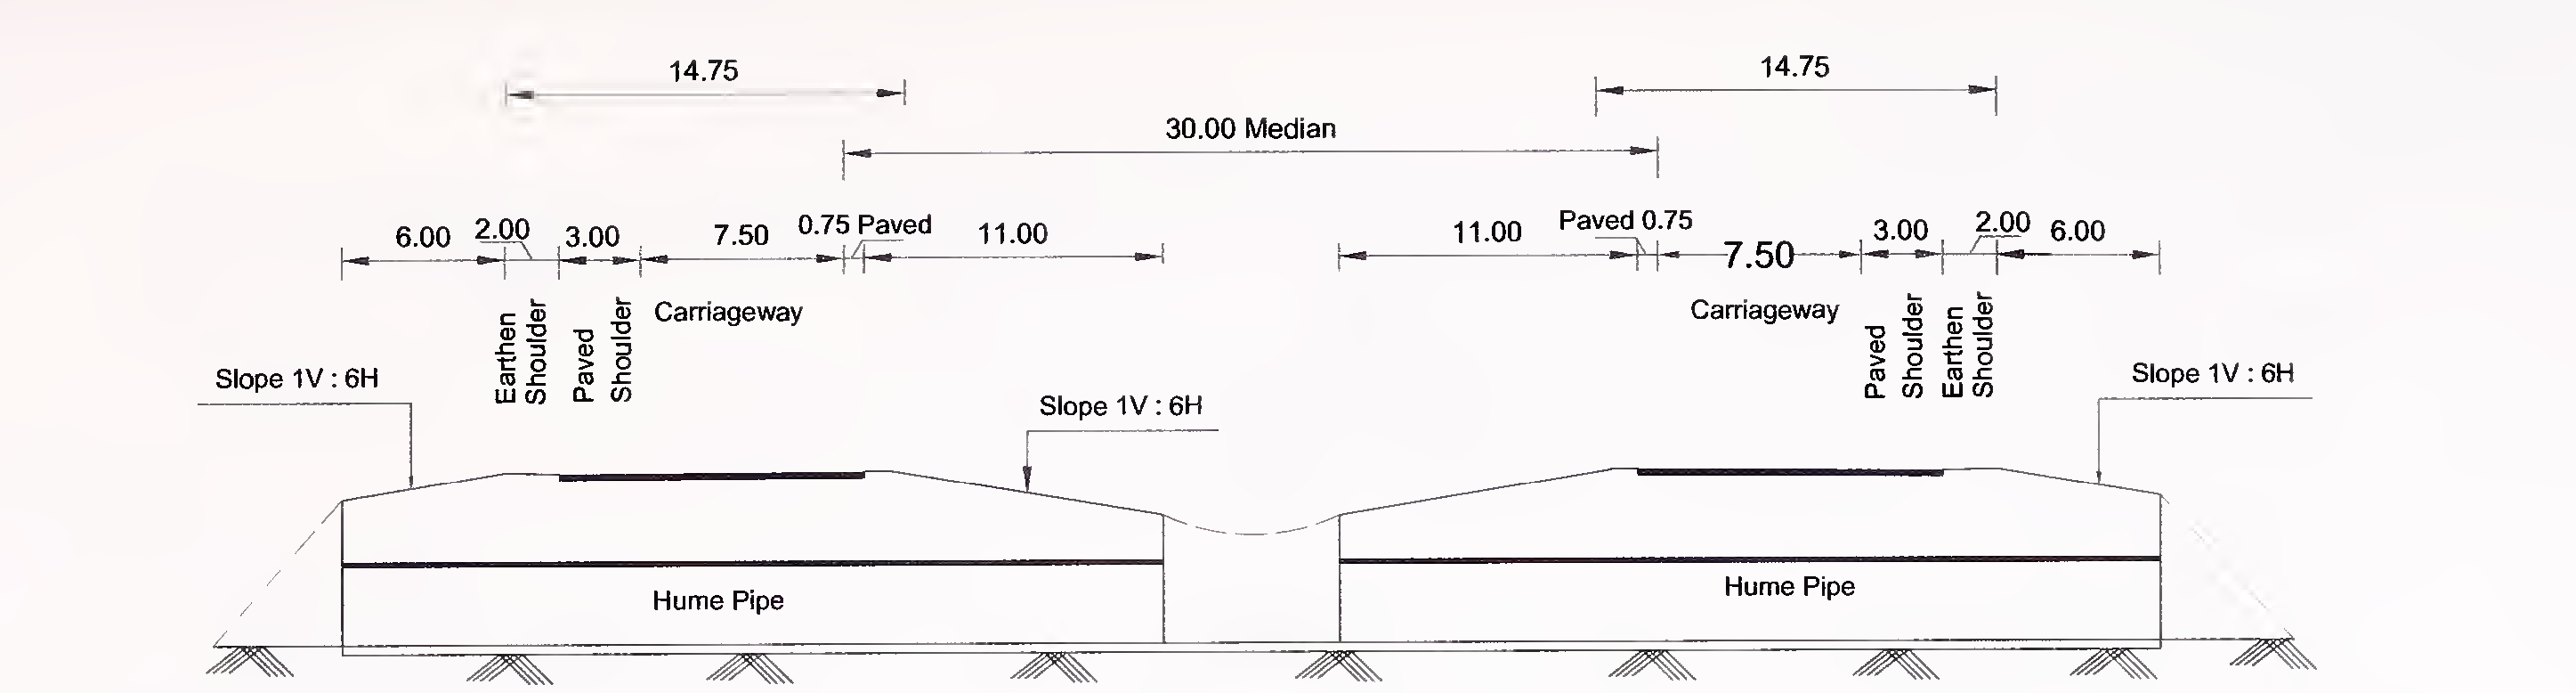 Fig. 6.1 (a) Typical Cross-section of Pipe Culvert for 4-Lane (2×2) Expressway with Depressed Median